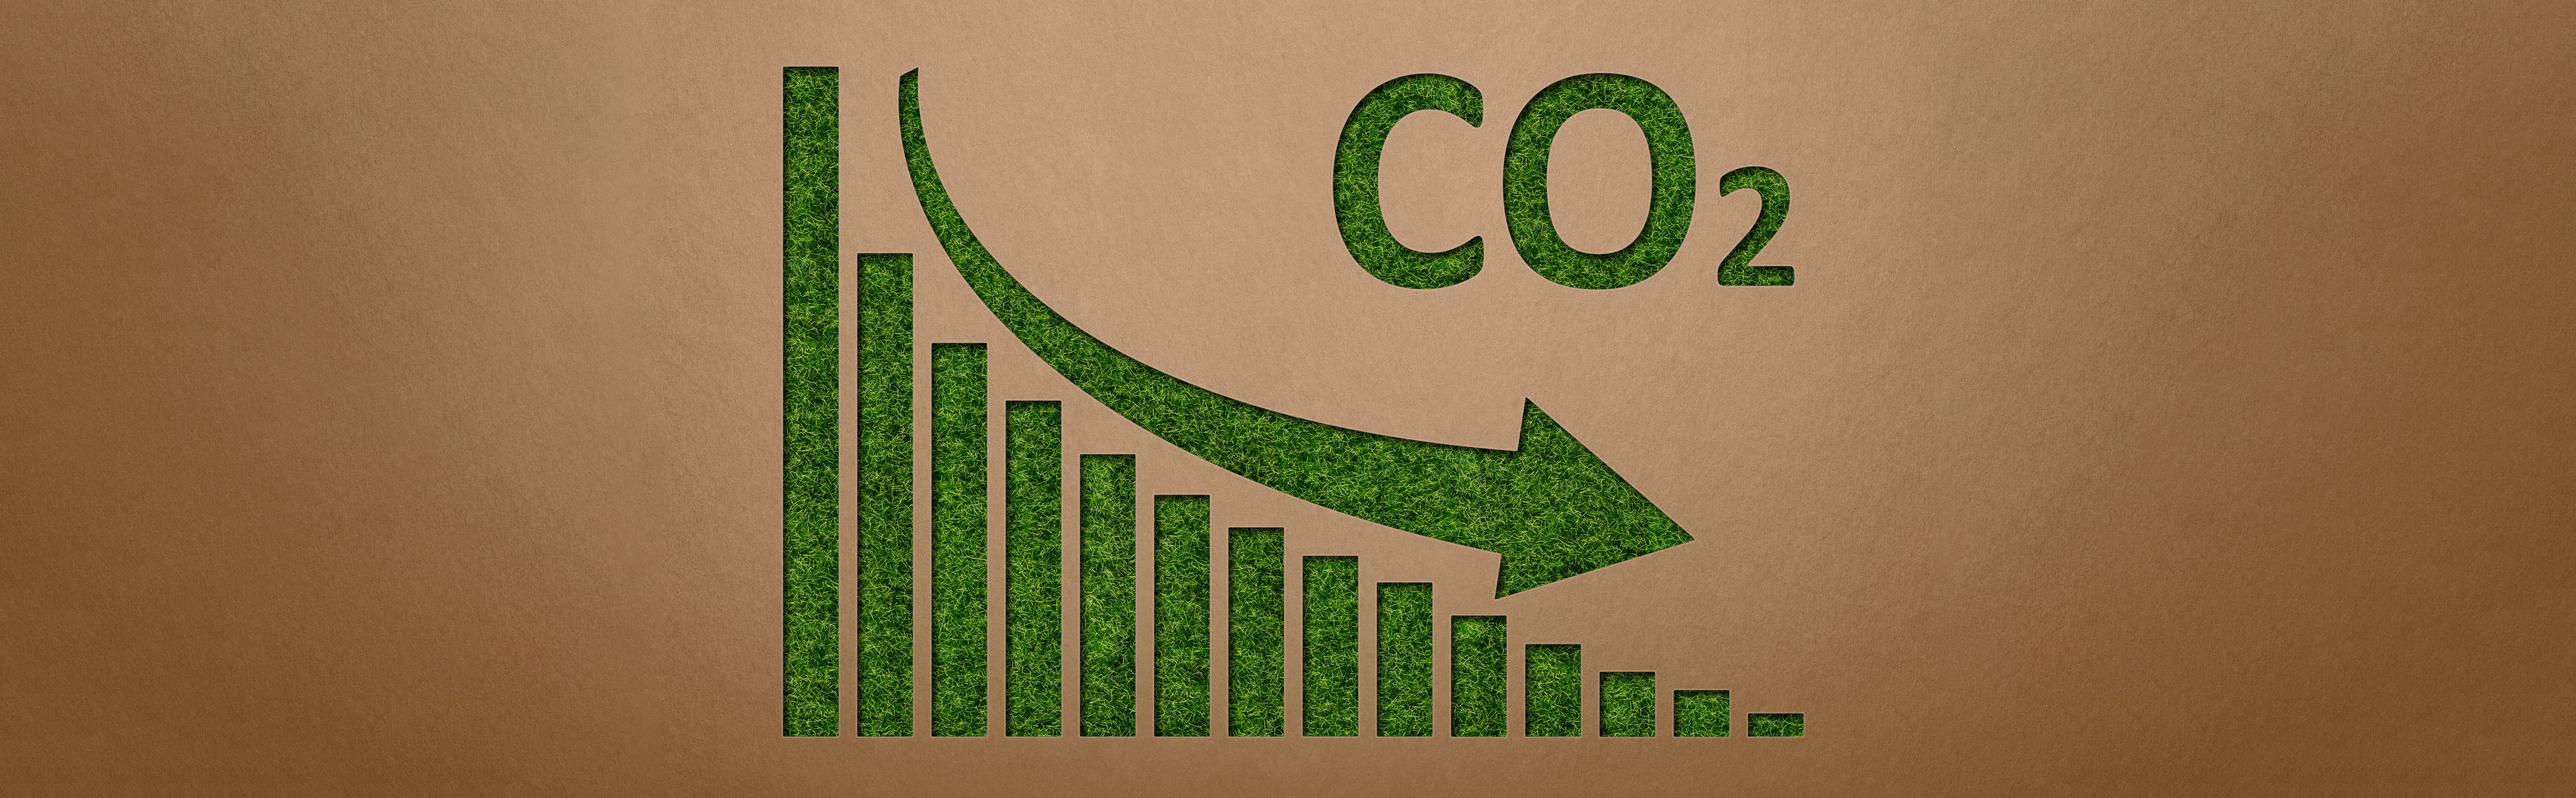 The carbon footprint of real estate is under control